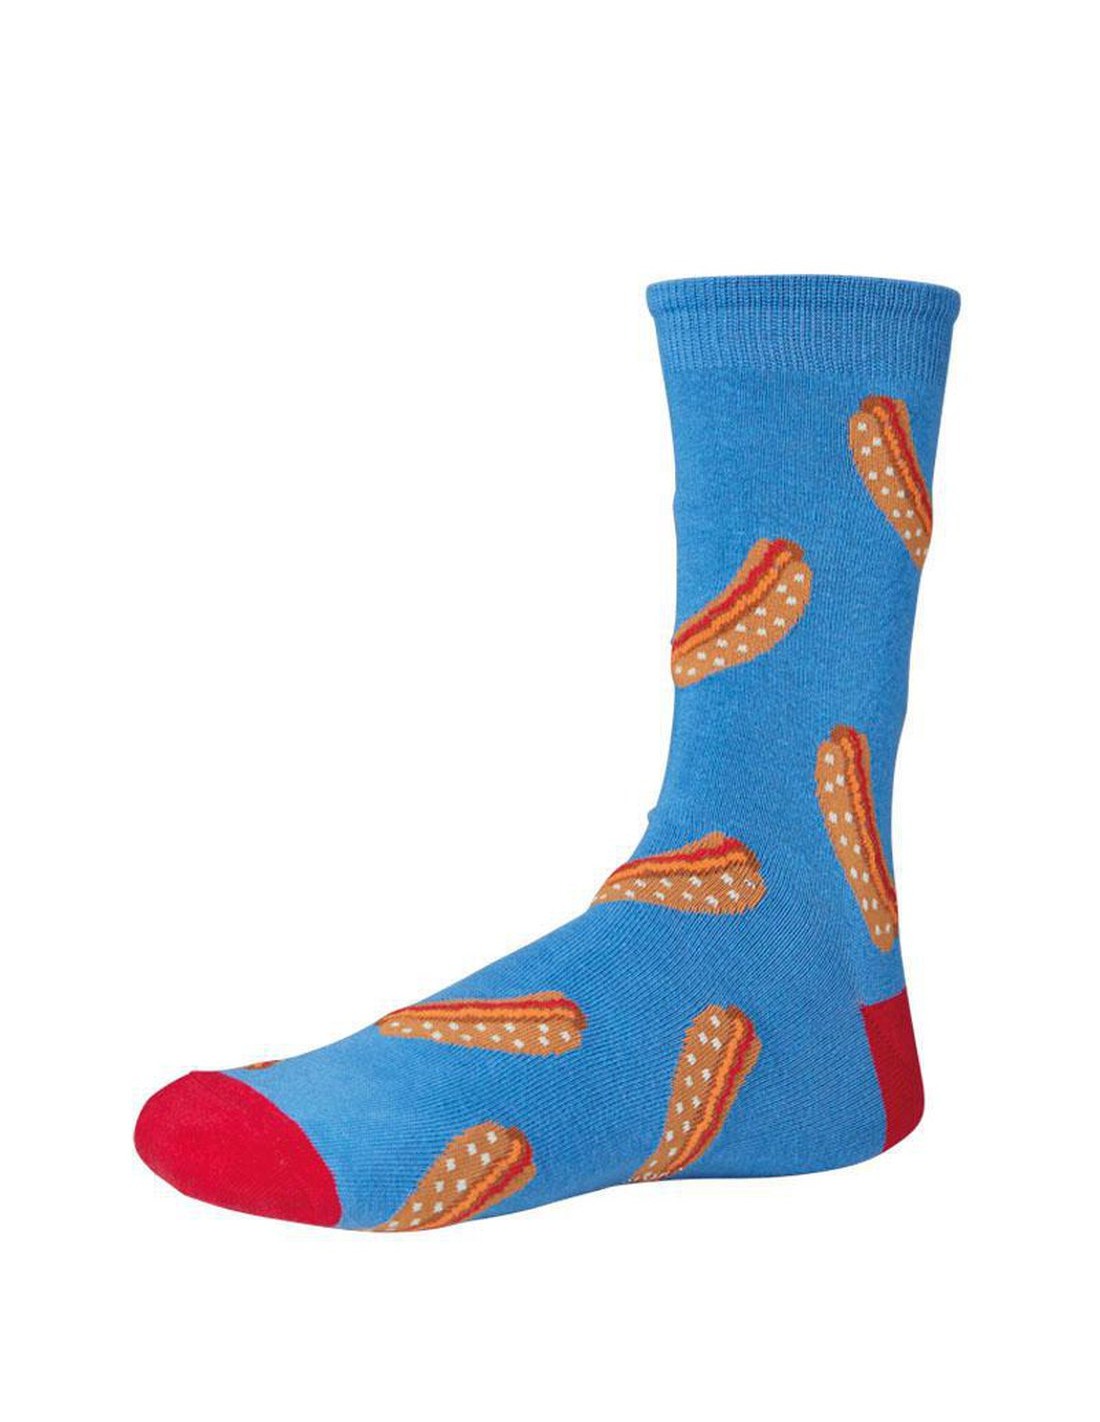 Ysabel Mora 22802 Hot Dog Sock - Sky blue cotton ankle socks with an all over hot dog pattern, red coloured heel and toe.